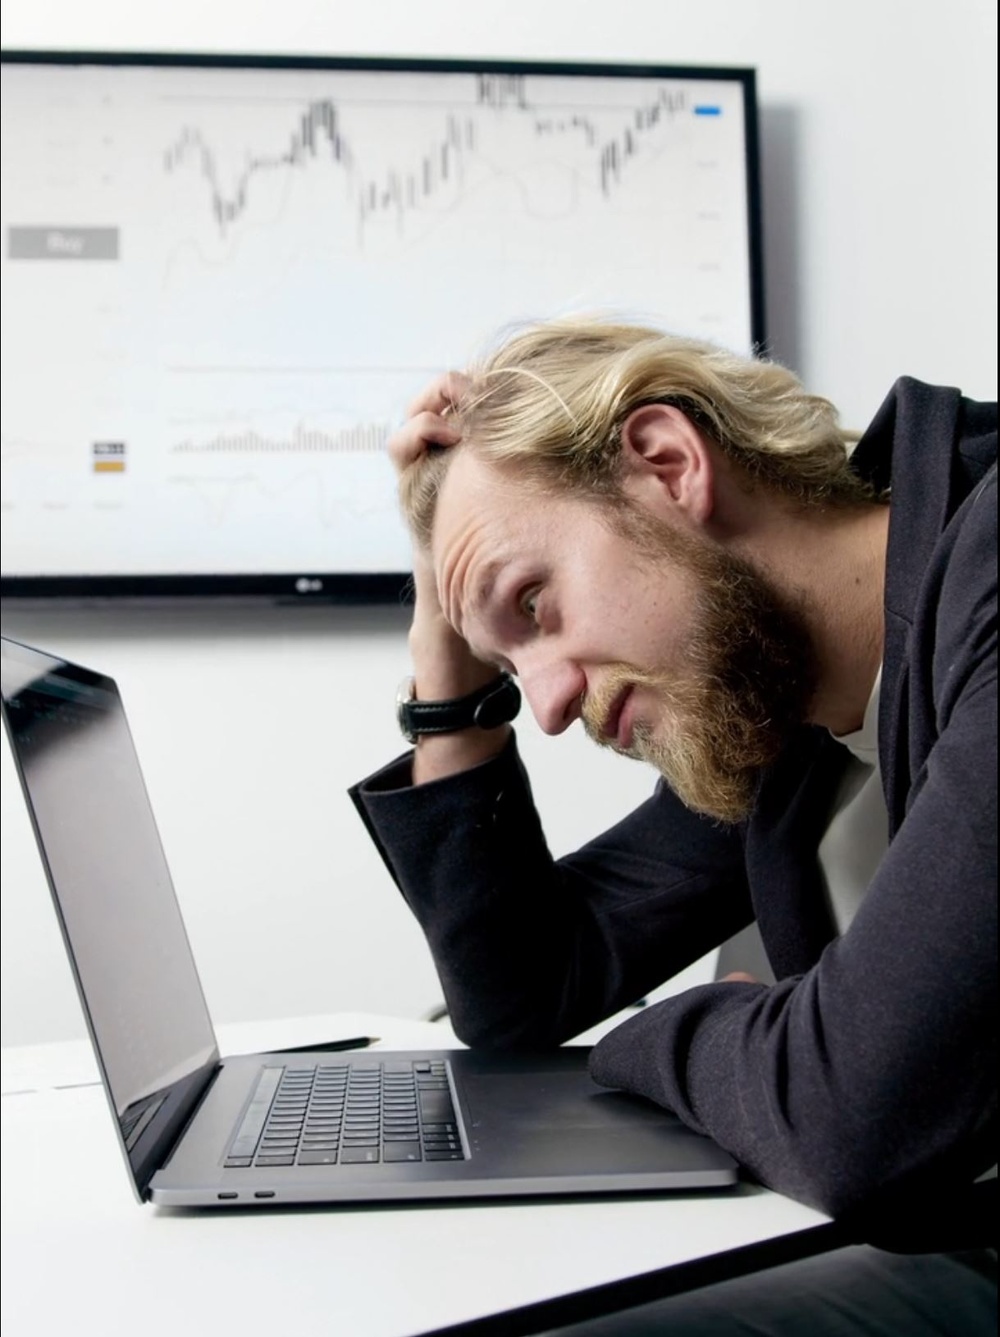 A blonde, bearded guy in a dark suite sits infront of his laptop pulling his hair and looking worried, in hte backgroudn there i a chart on the wall.